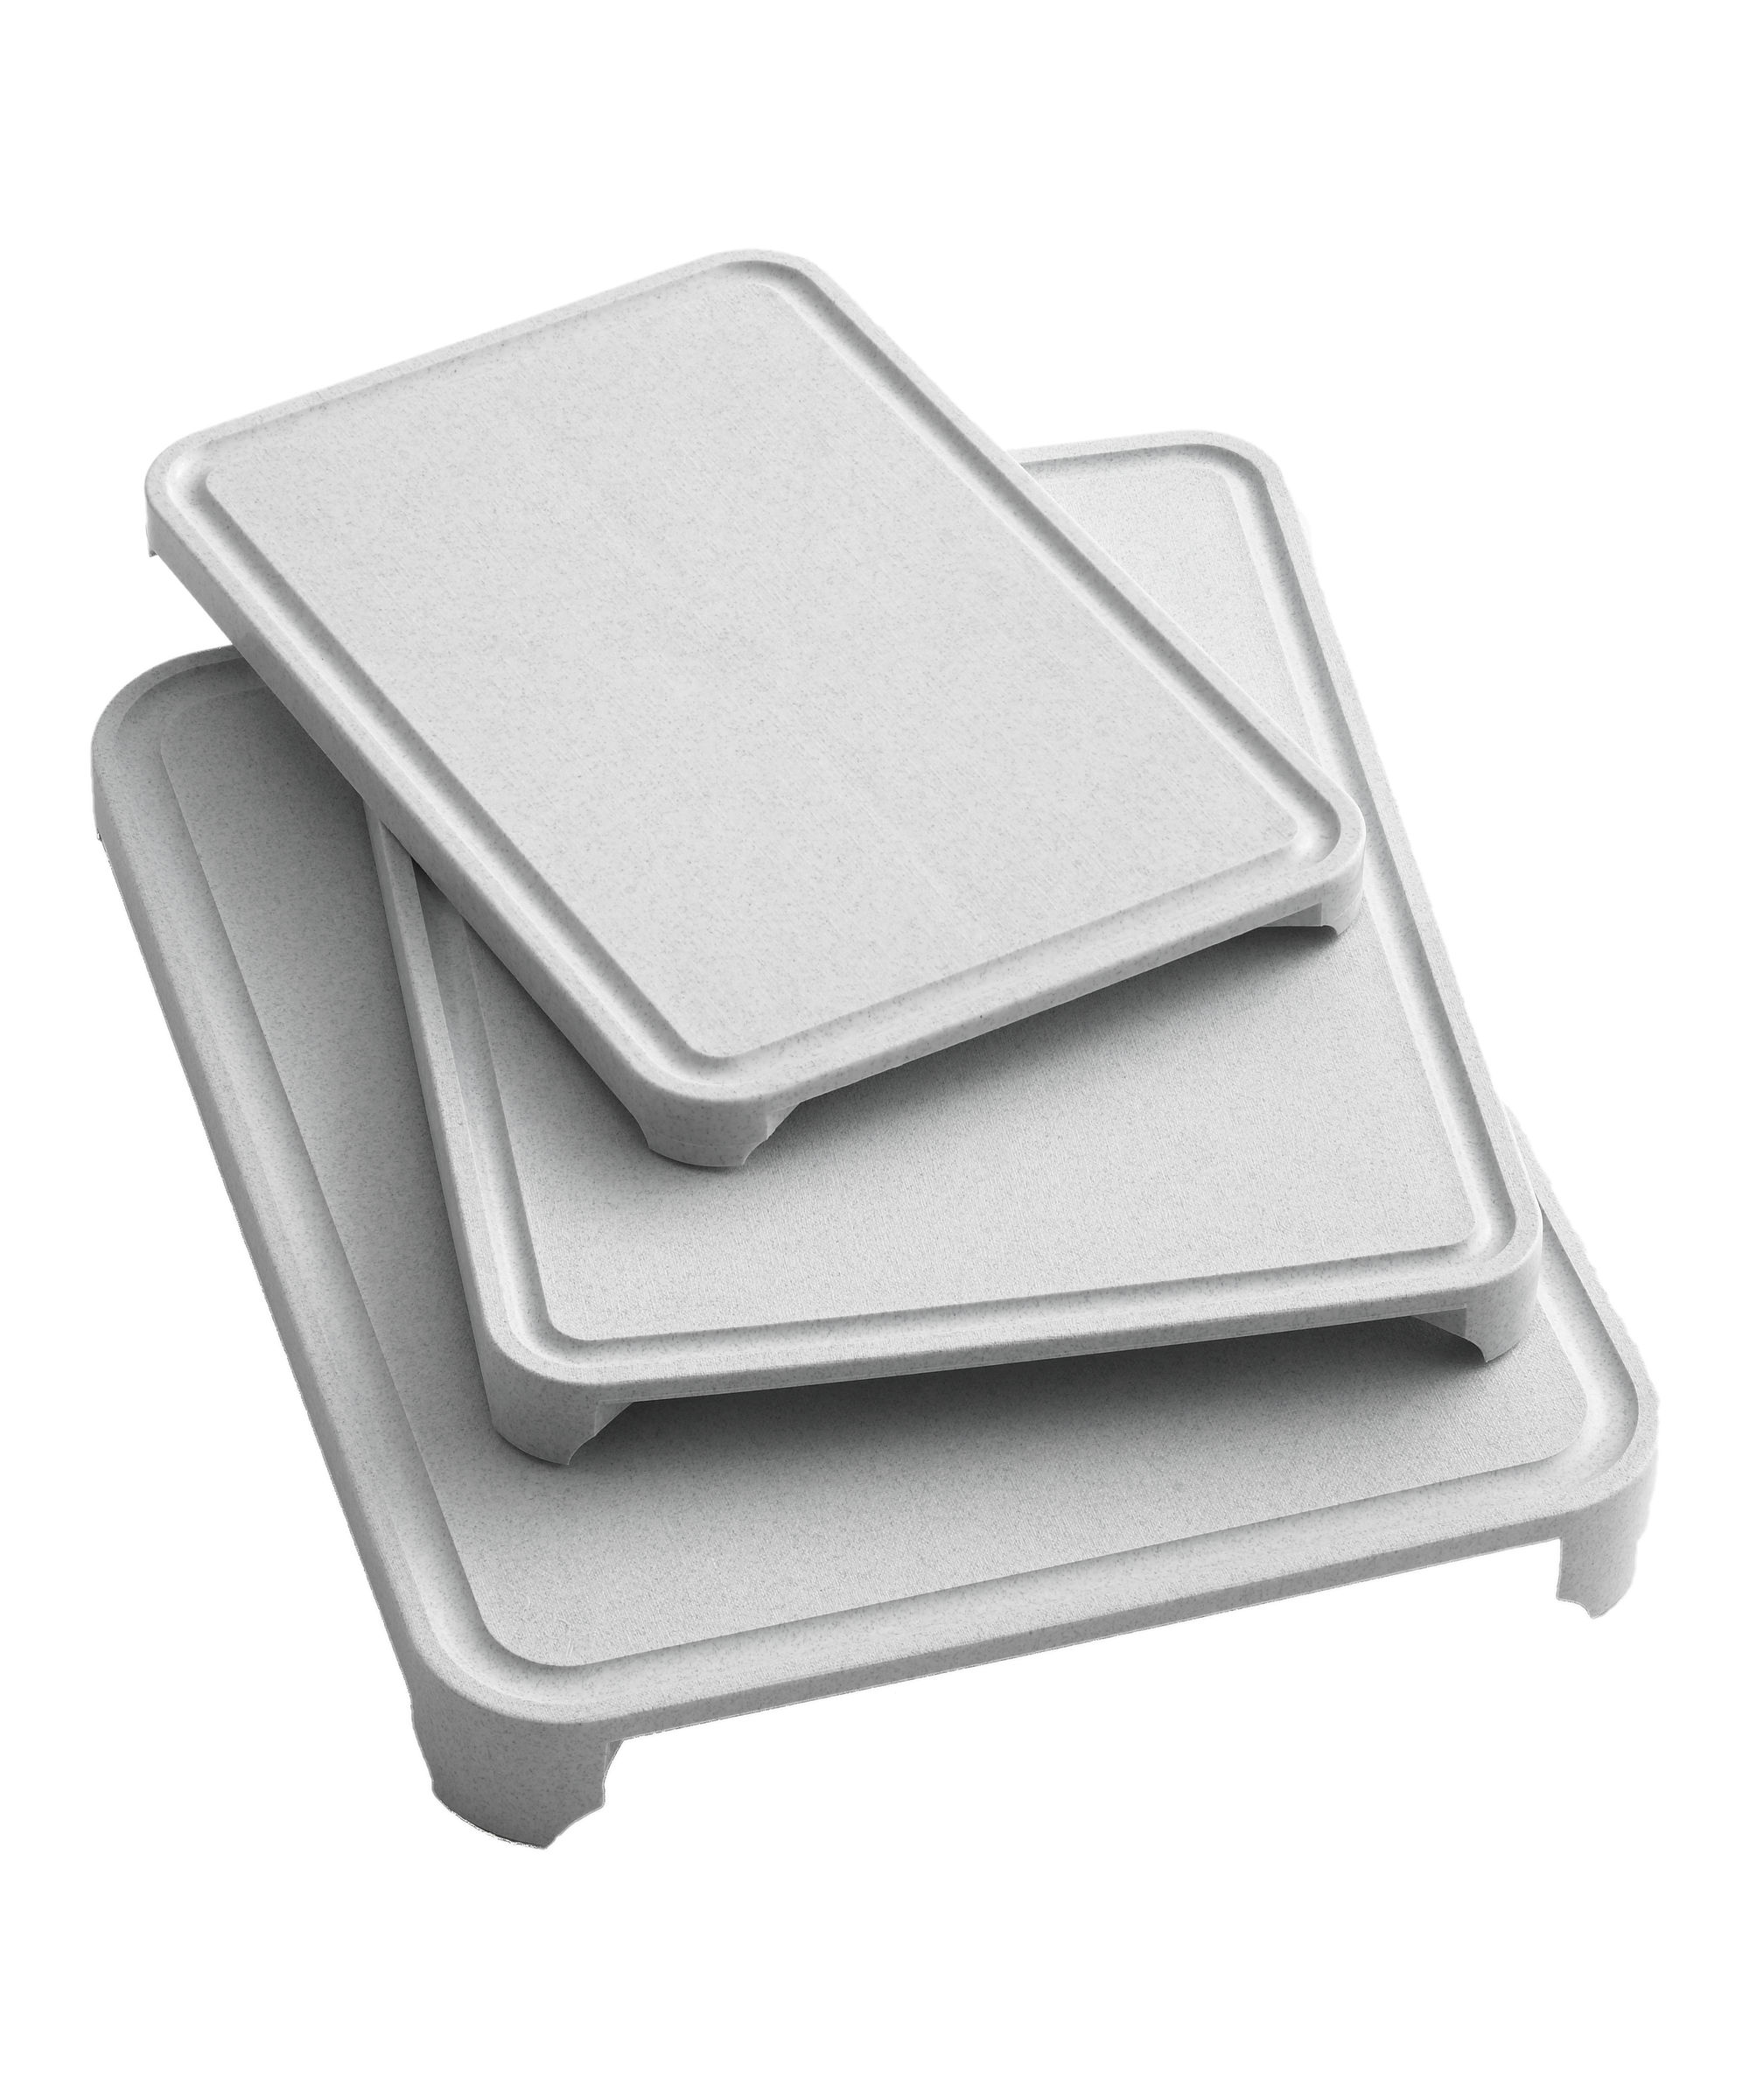 Henckels Statement 2-pc Prep Set with Small Cutting Board, 3-pc - Fry's  Food Stores